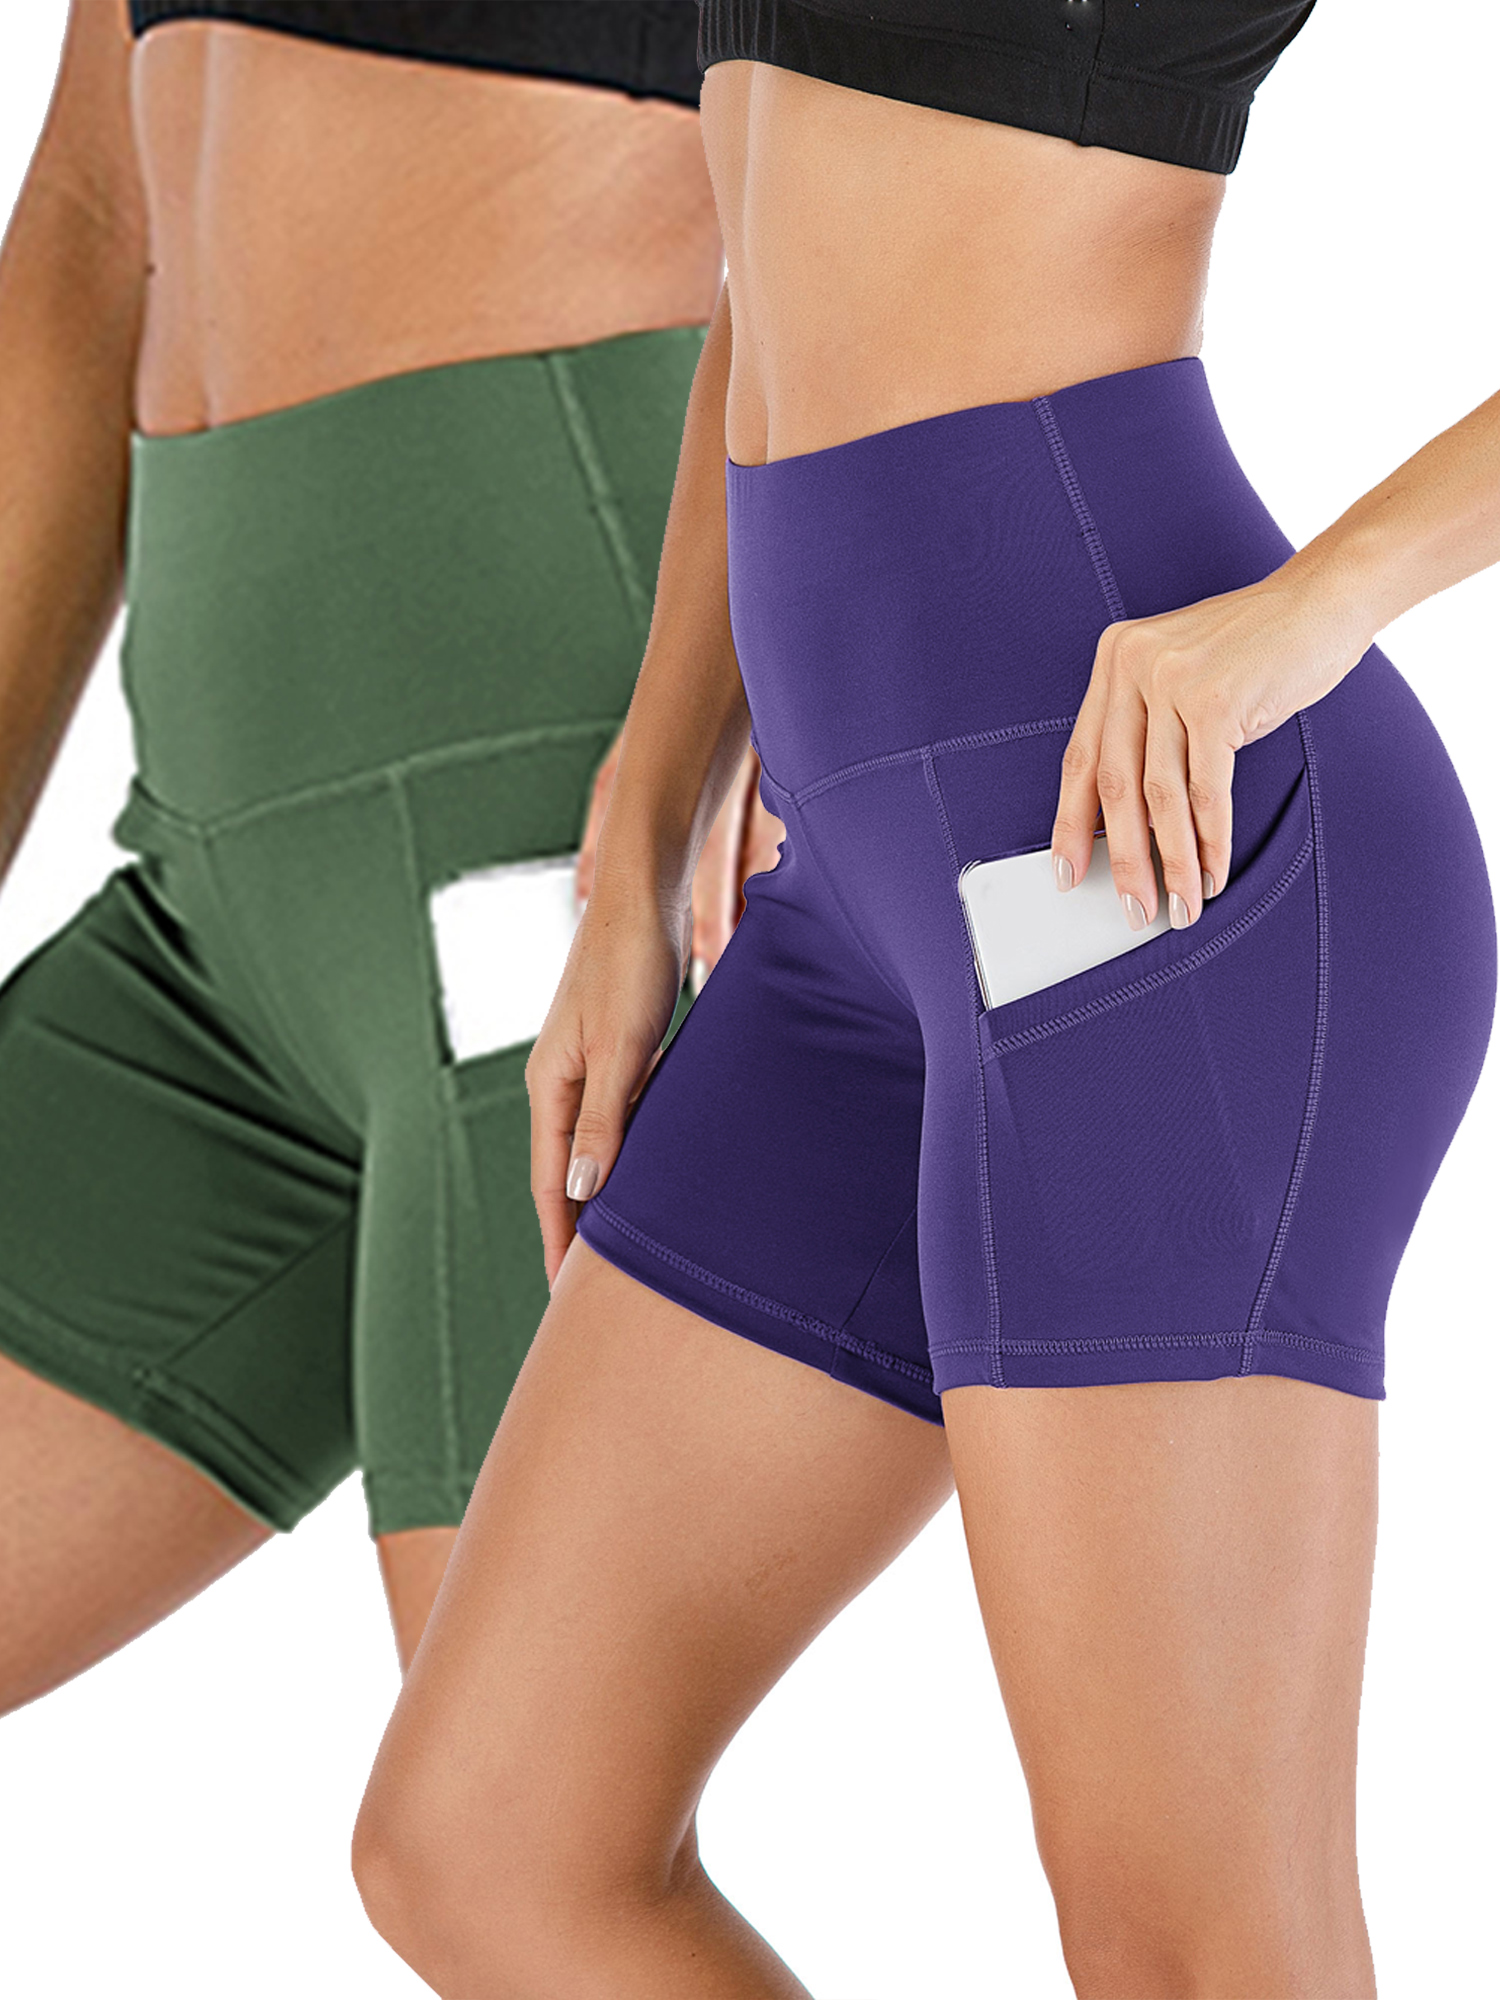 YouLoveIt Womens Yoga Shorts Butt Lifting Yoga Shorts High Waist Tummy Control Yoga Leggings Solid Color Yoga Running Shorts Yoga Short Leggings Stretch Ruched Hot Shorts with Pockets - image 1 of 6